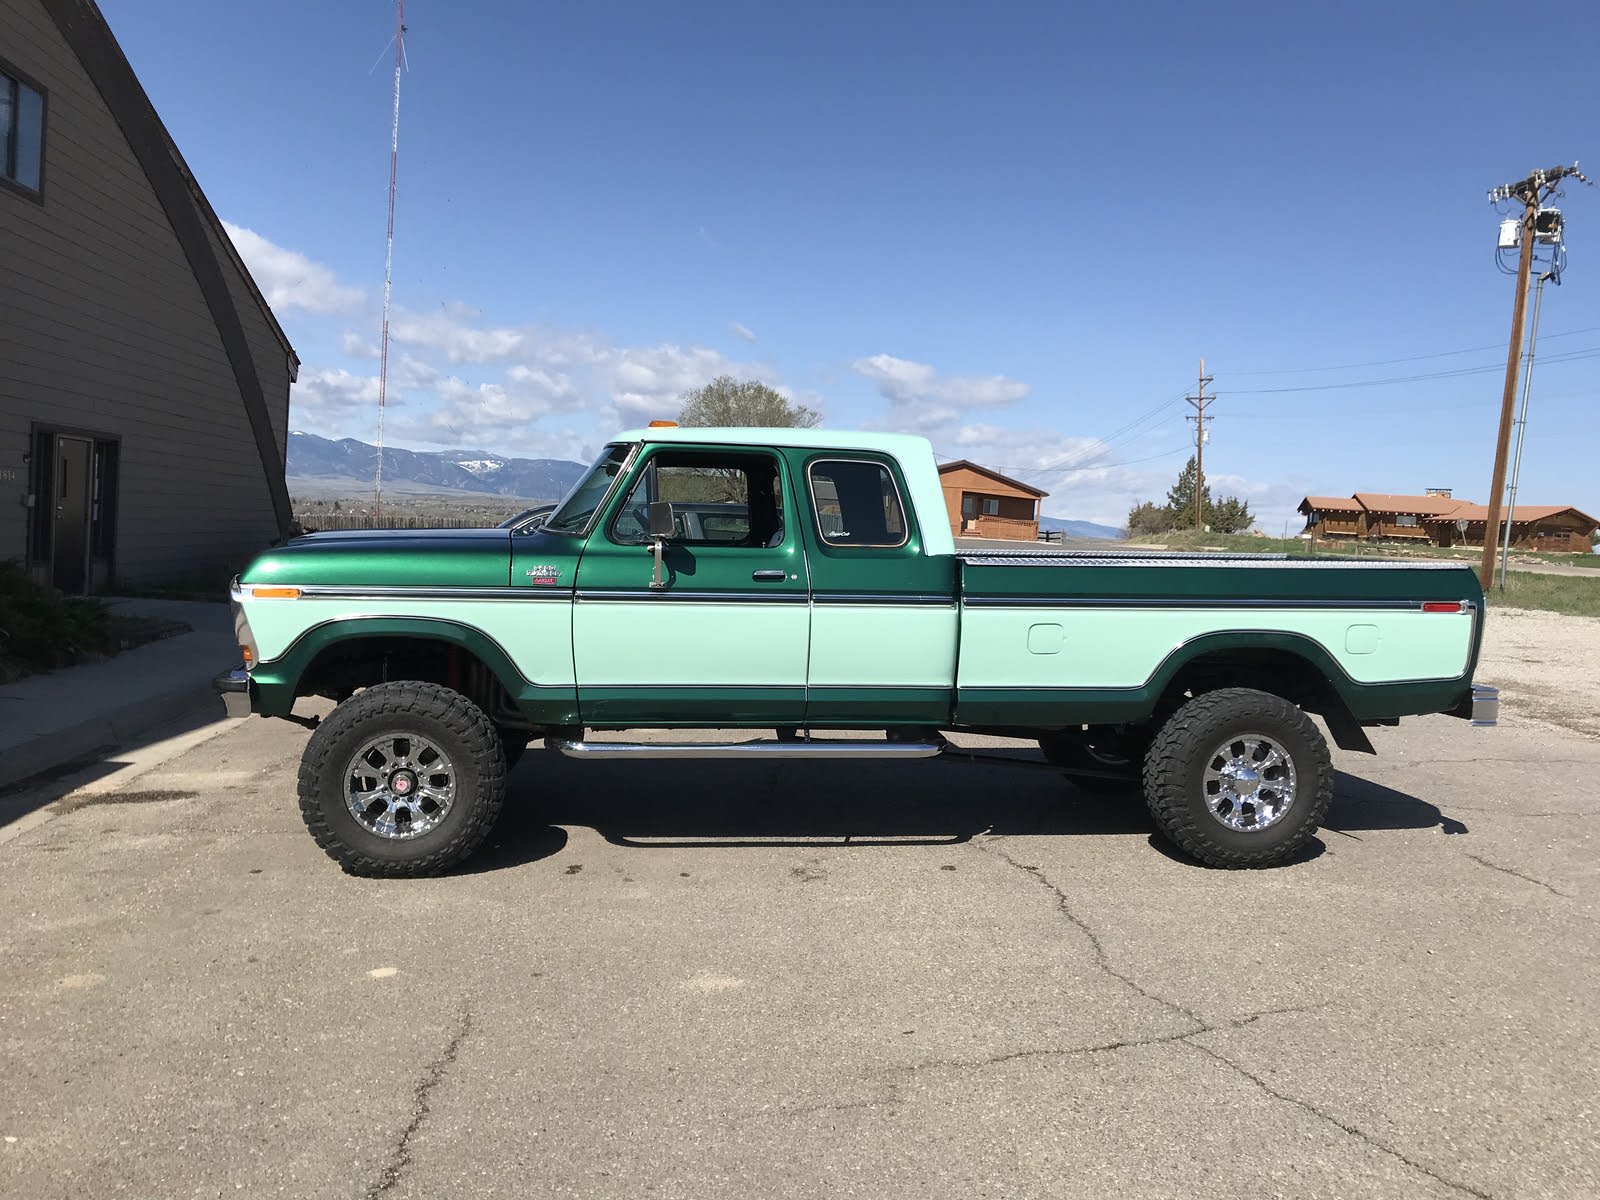 Ford F 150 Questions Waht Was The List Price For A 1979 Ford F150 In 1979 Cargurus